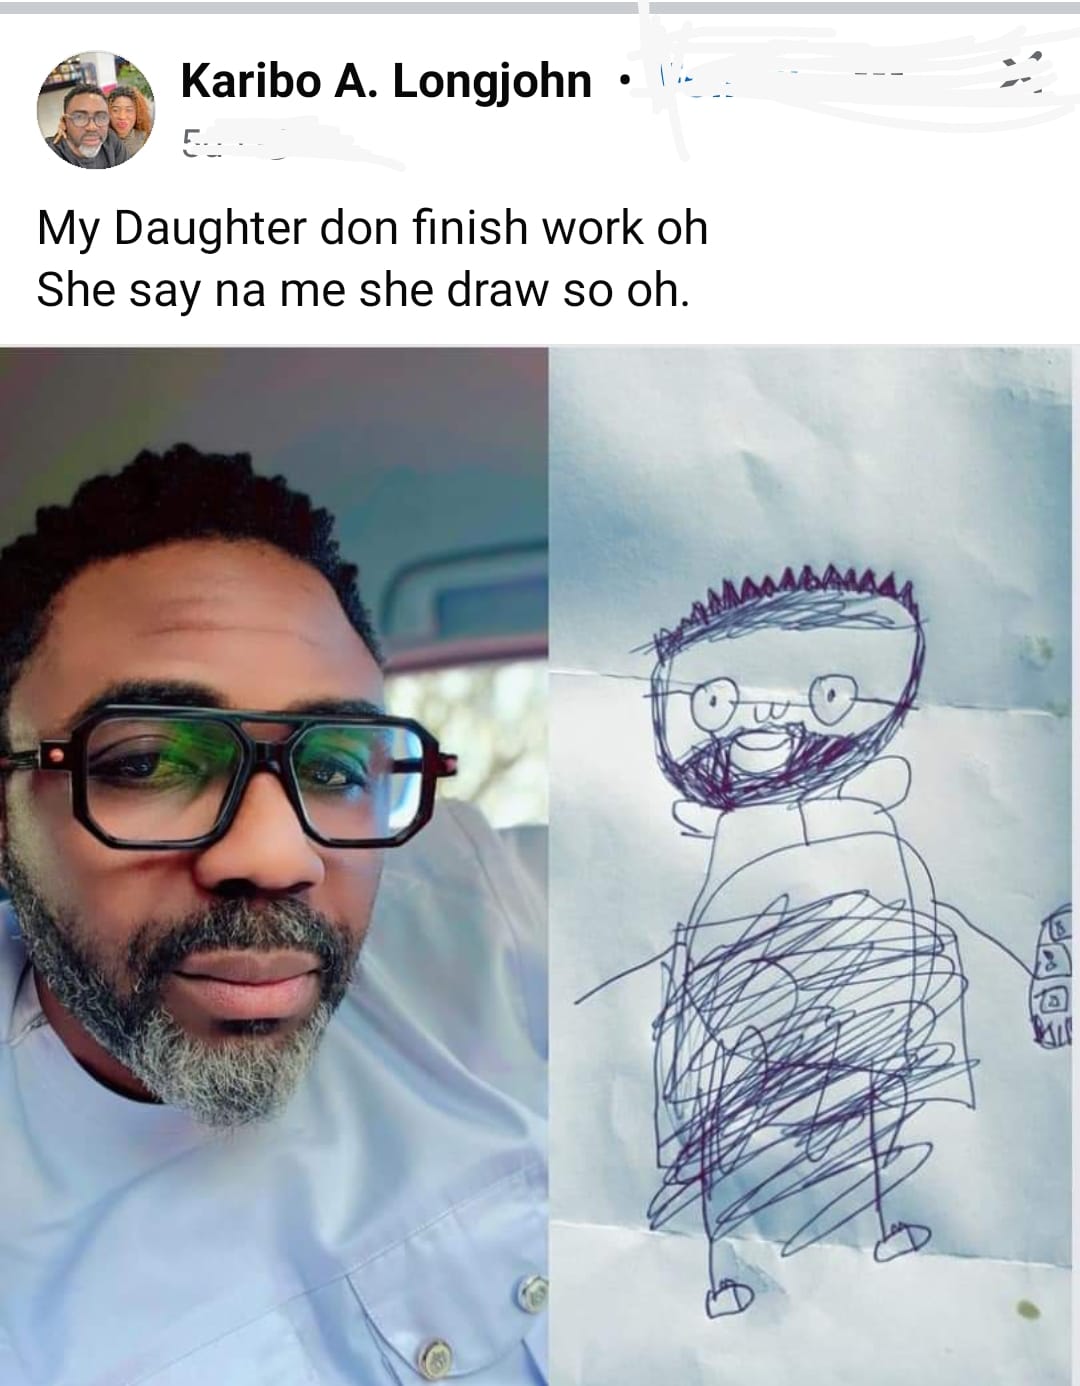 A photo of the drawing and Karibo's social media post has been shared online, showcasing the daughter's artwork and her father's amused reaction.